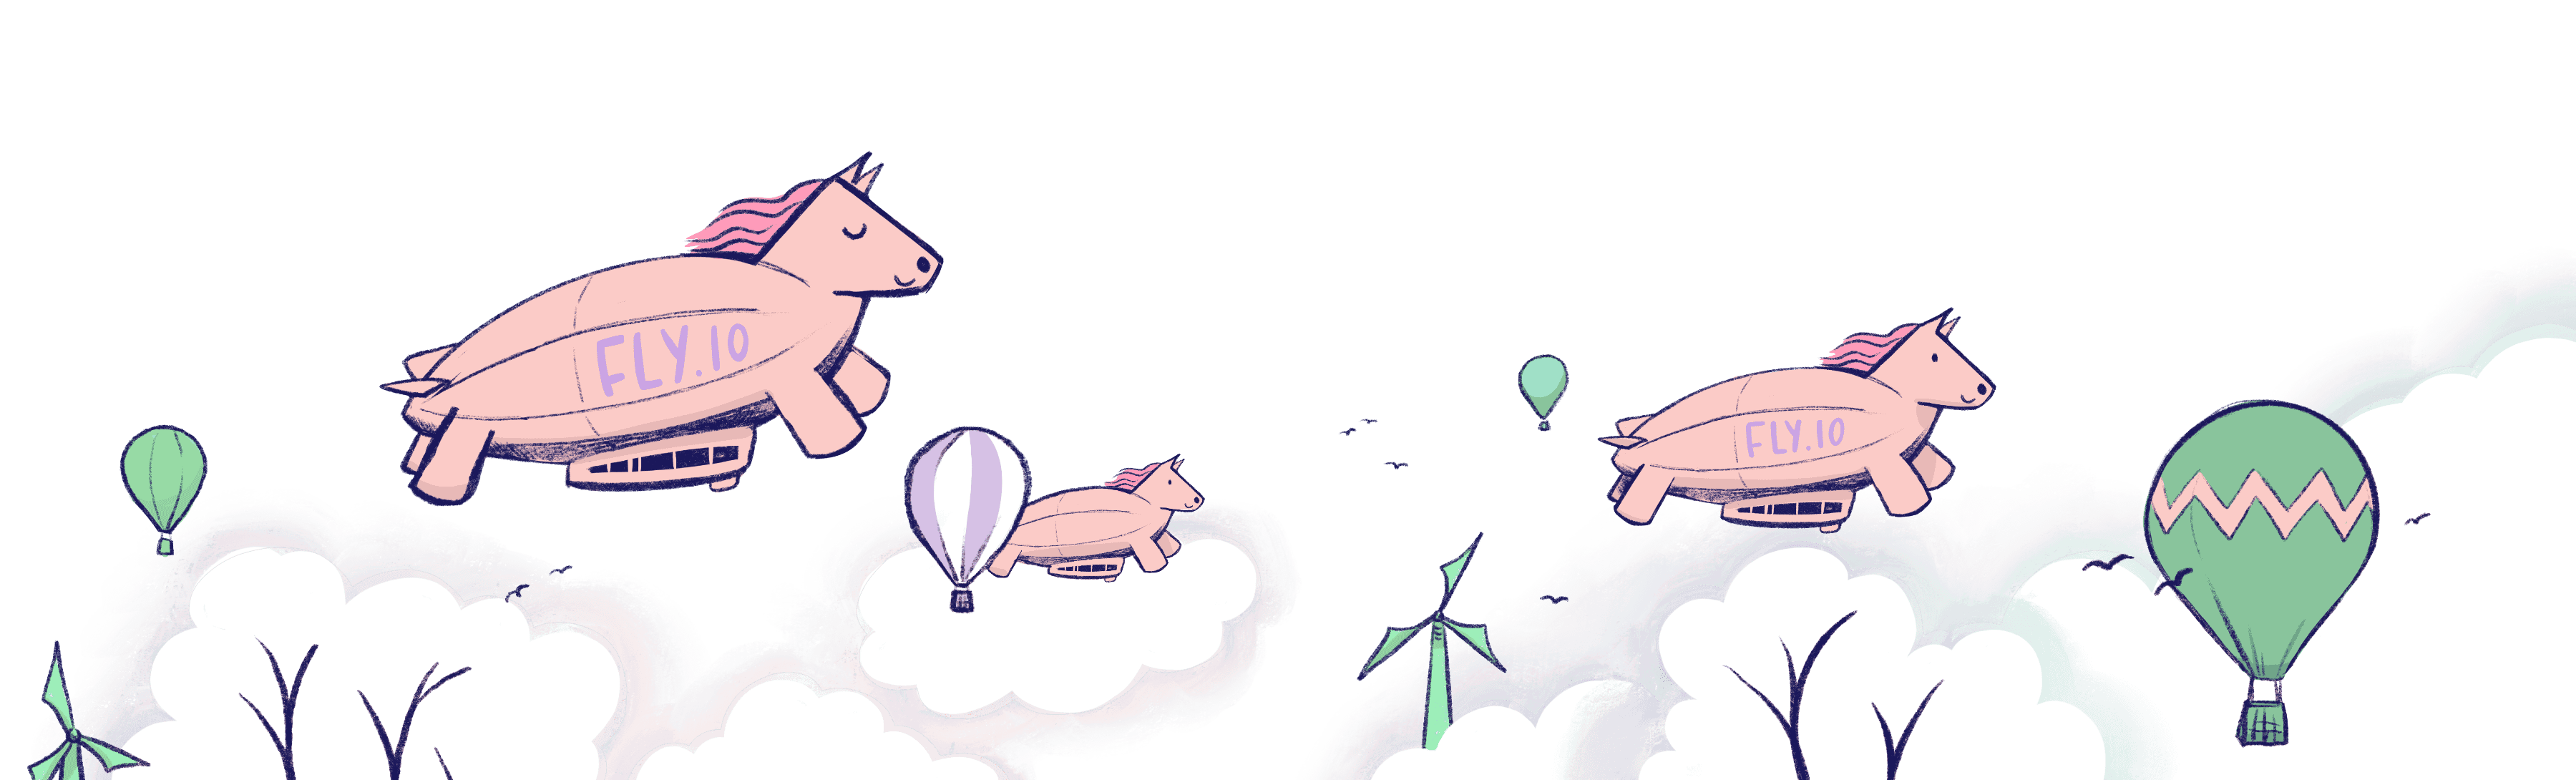 A whimsical drawing of horse-themed blimps flying through a cloudy background.